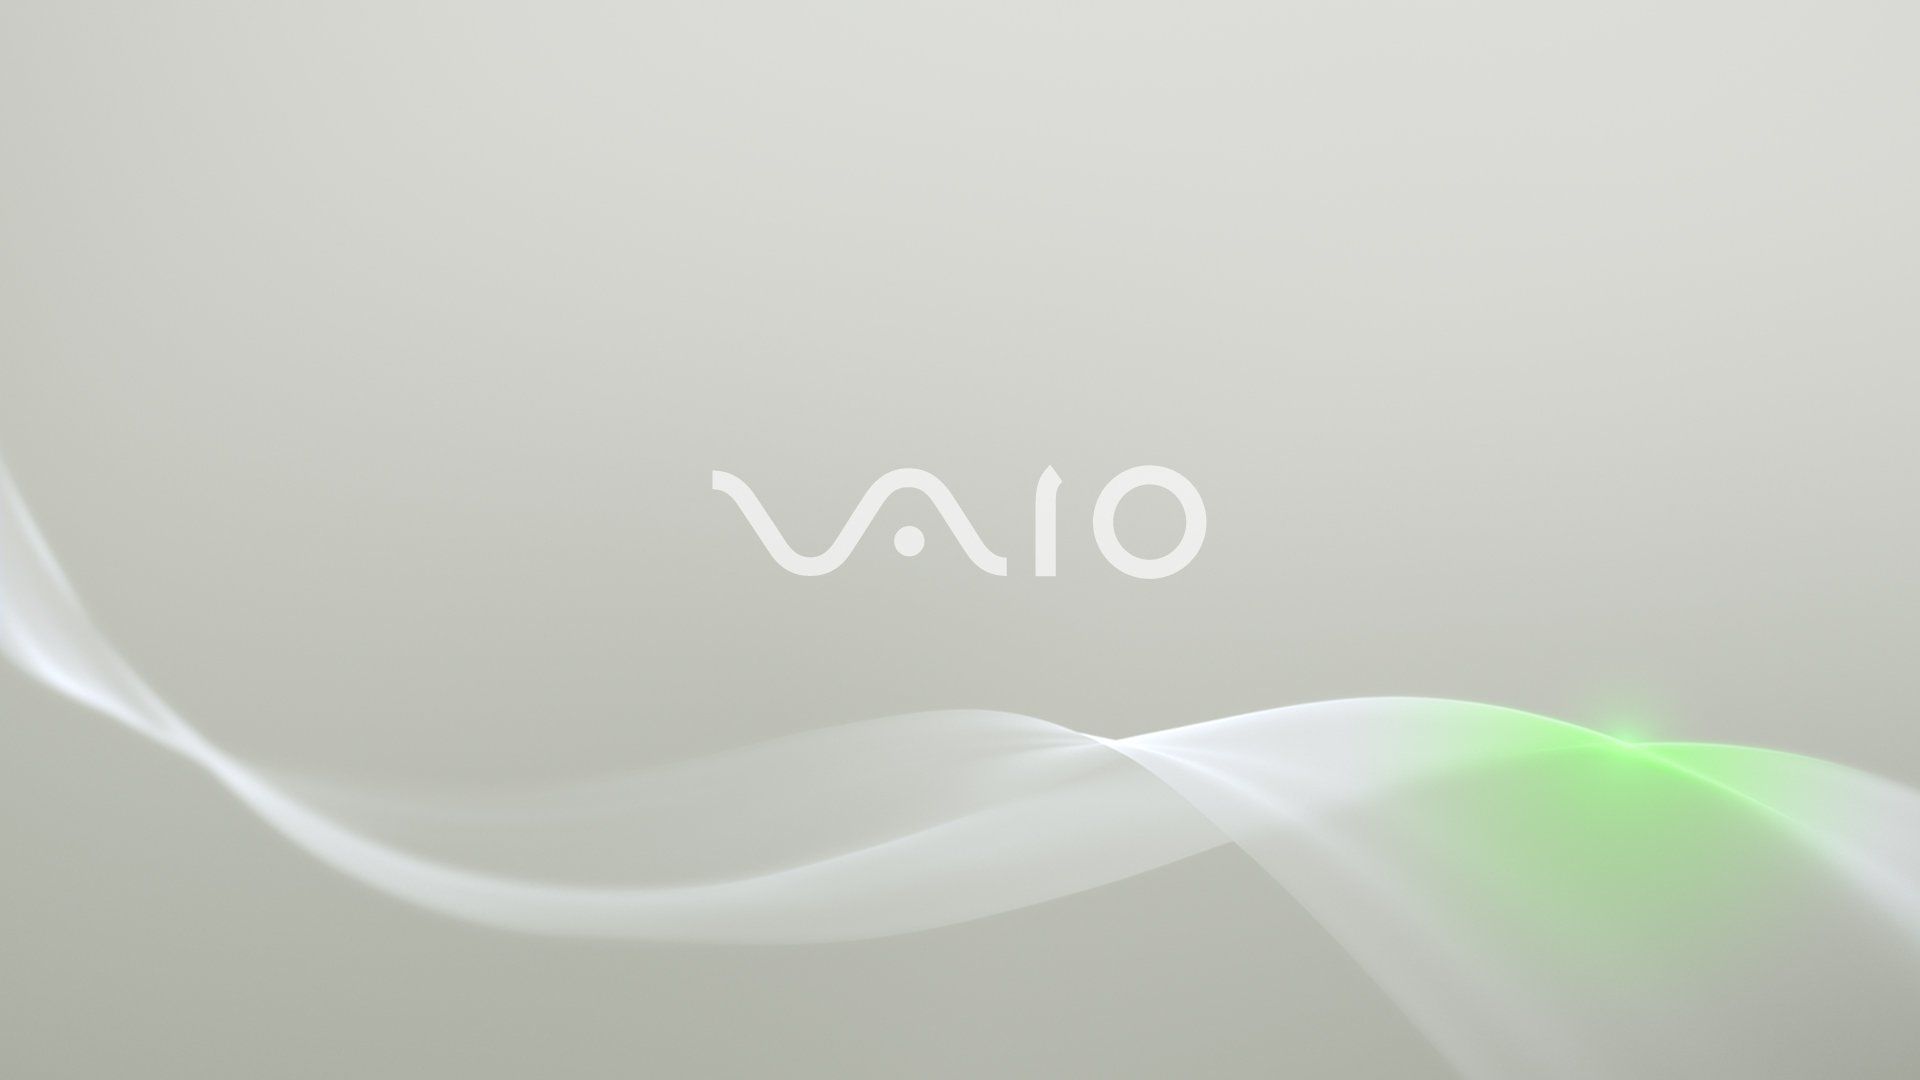 HD Sony Vaio Wallpapers & Vaio Backgrounds For Free Download